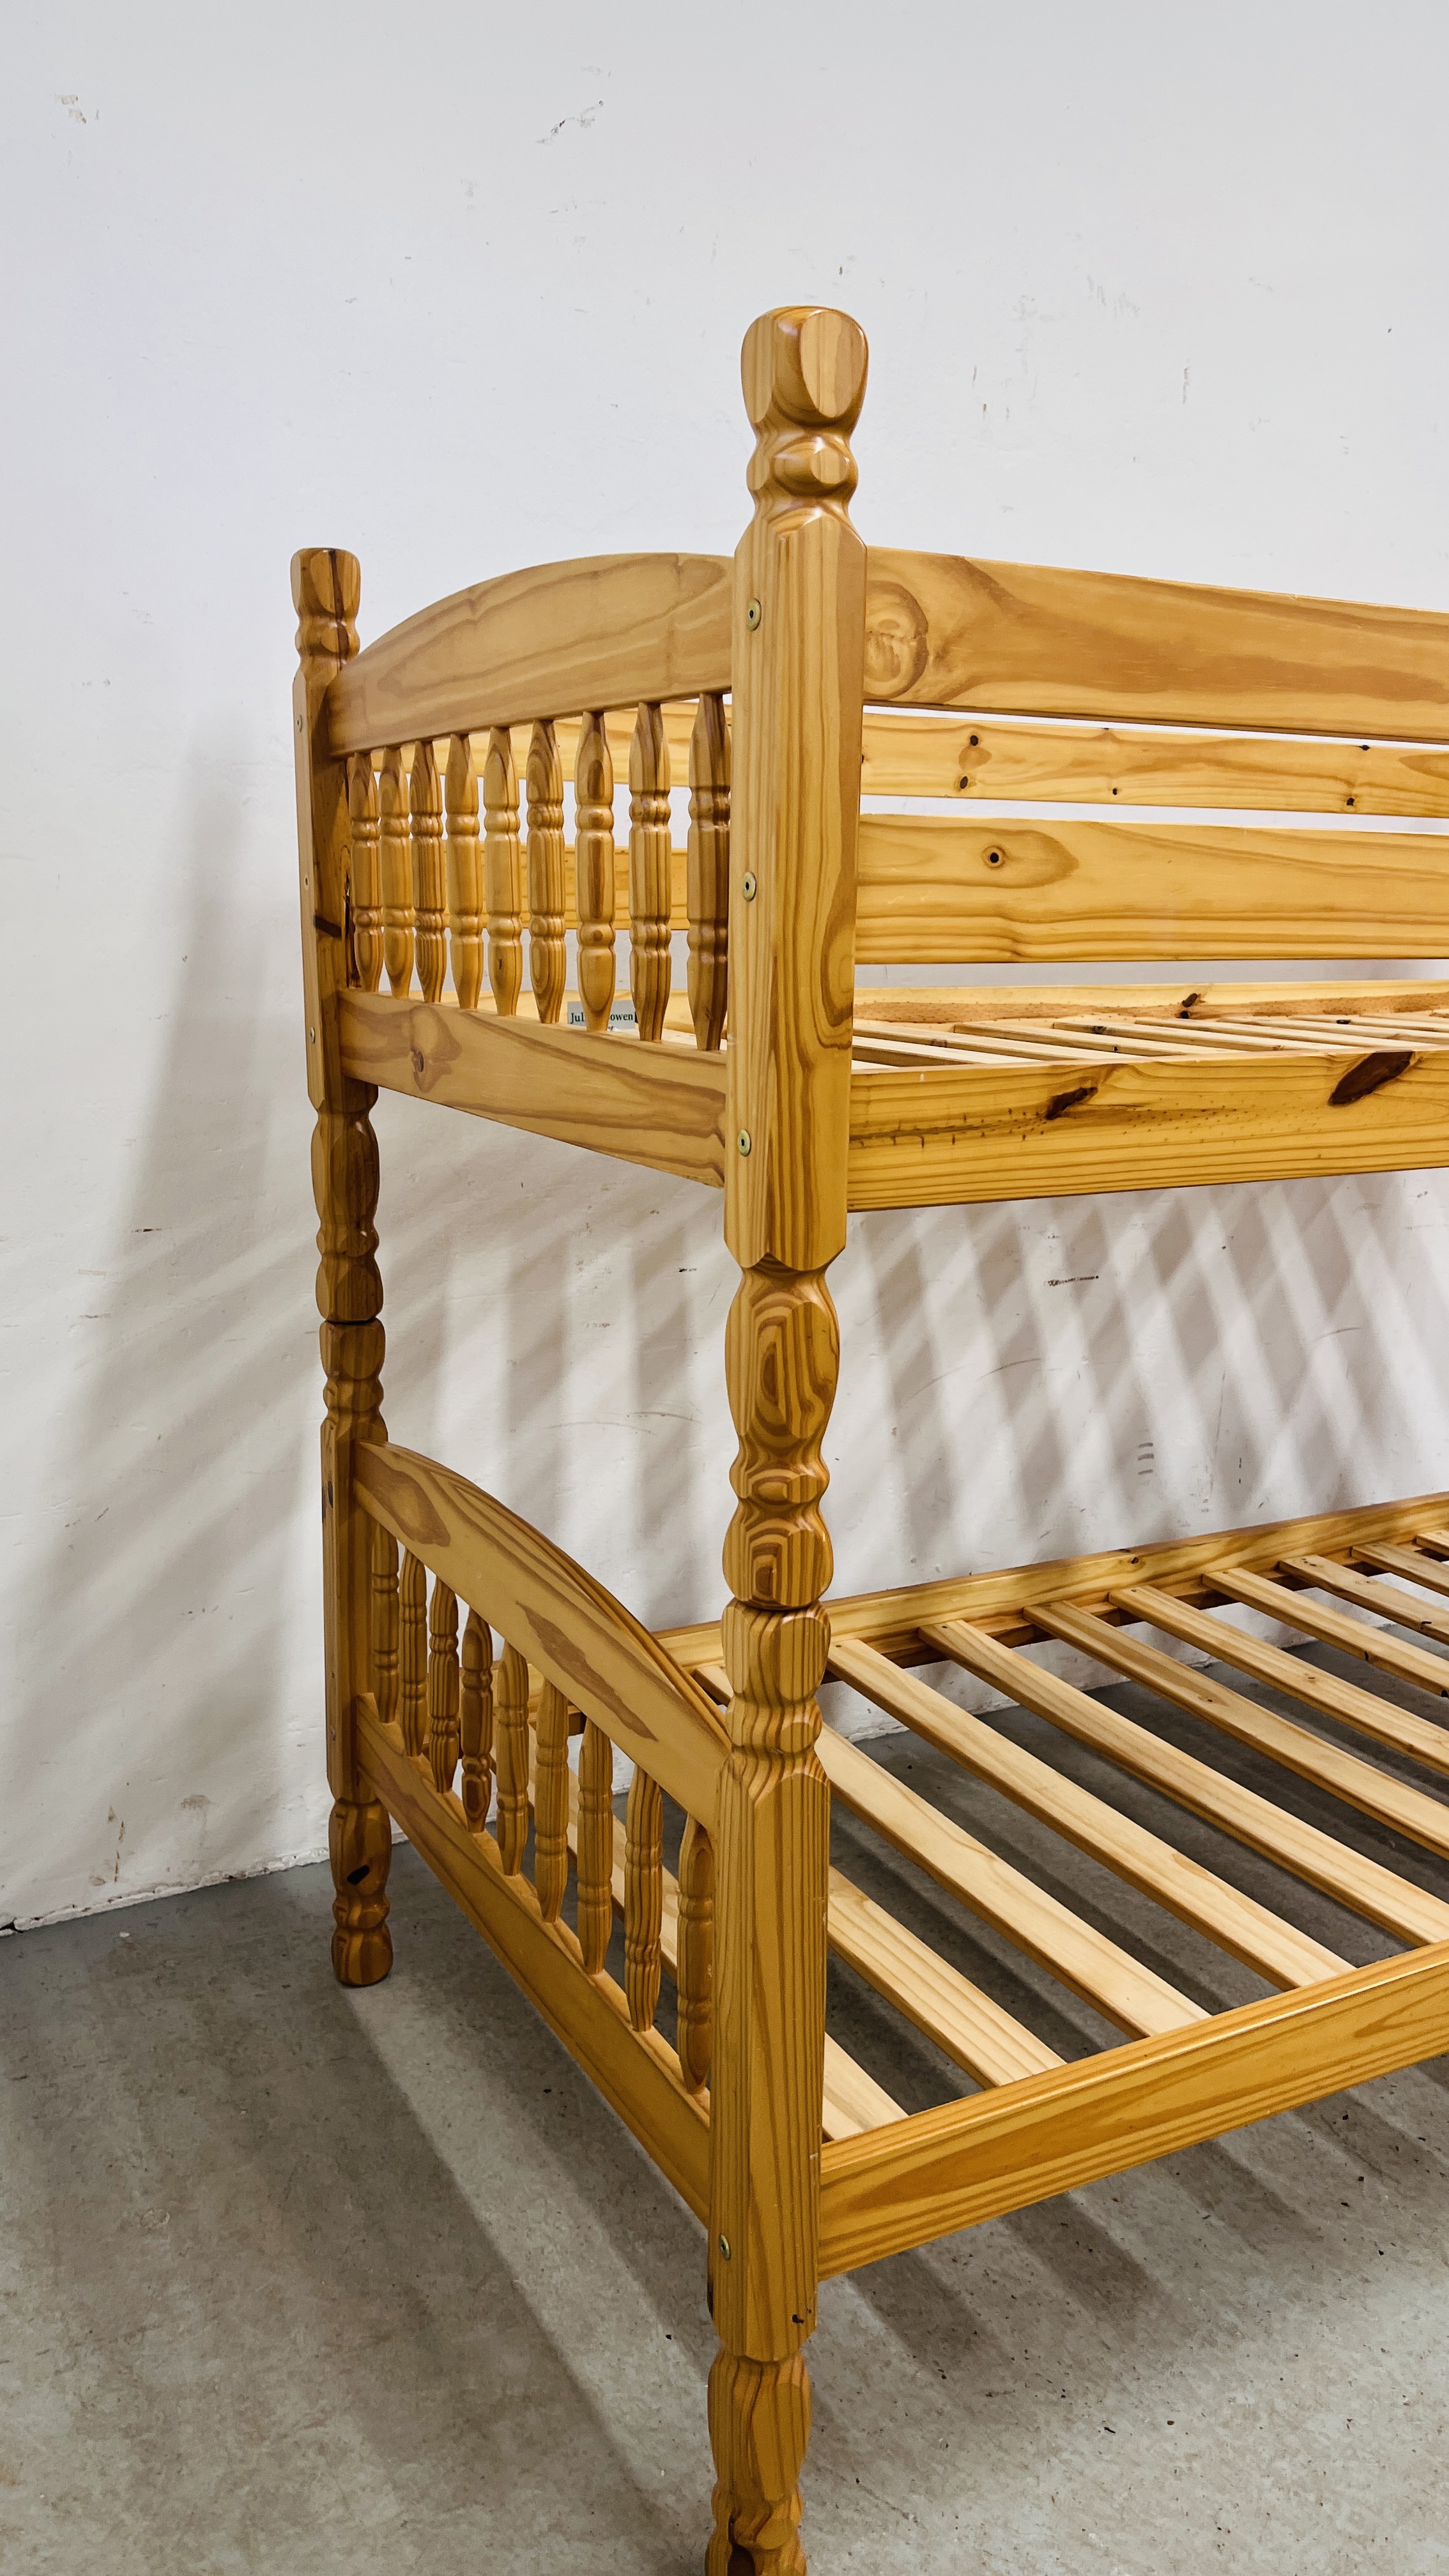 A PINE FRAME BUNK BED - Image 10 of 11